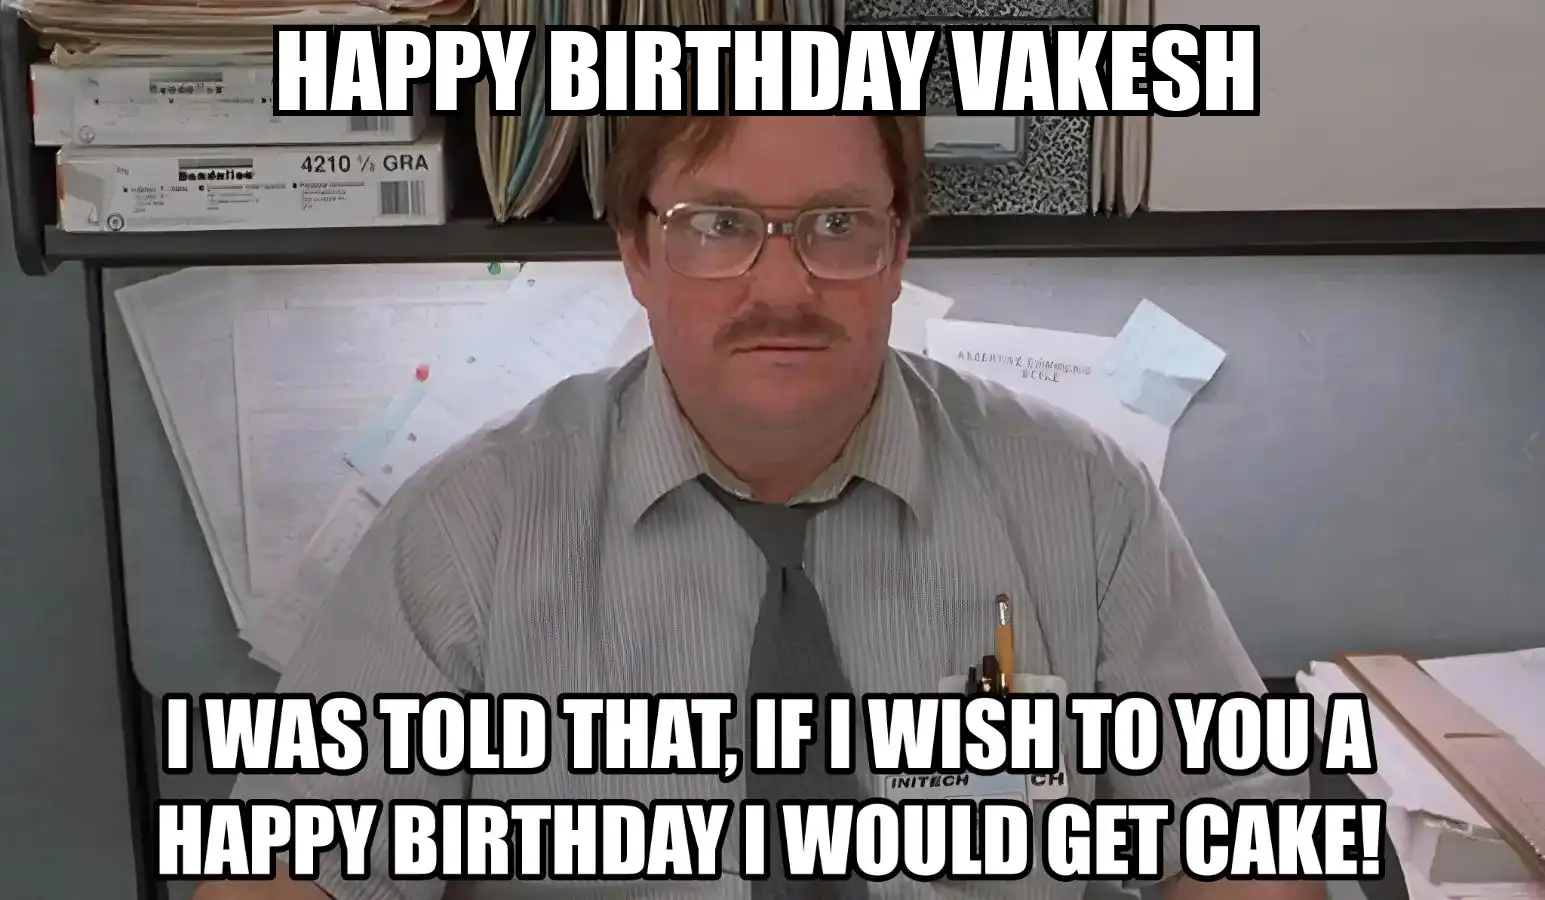 Happy Birthday Vakesh I Would Get A Cake Meme